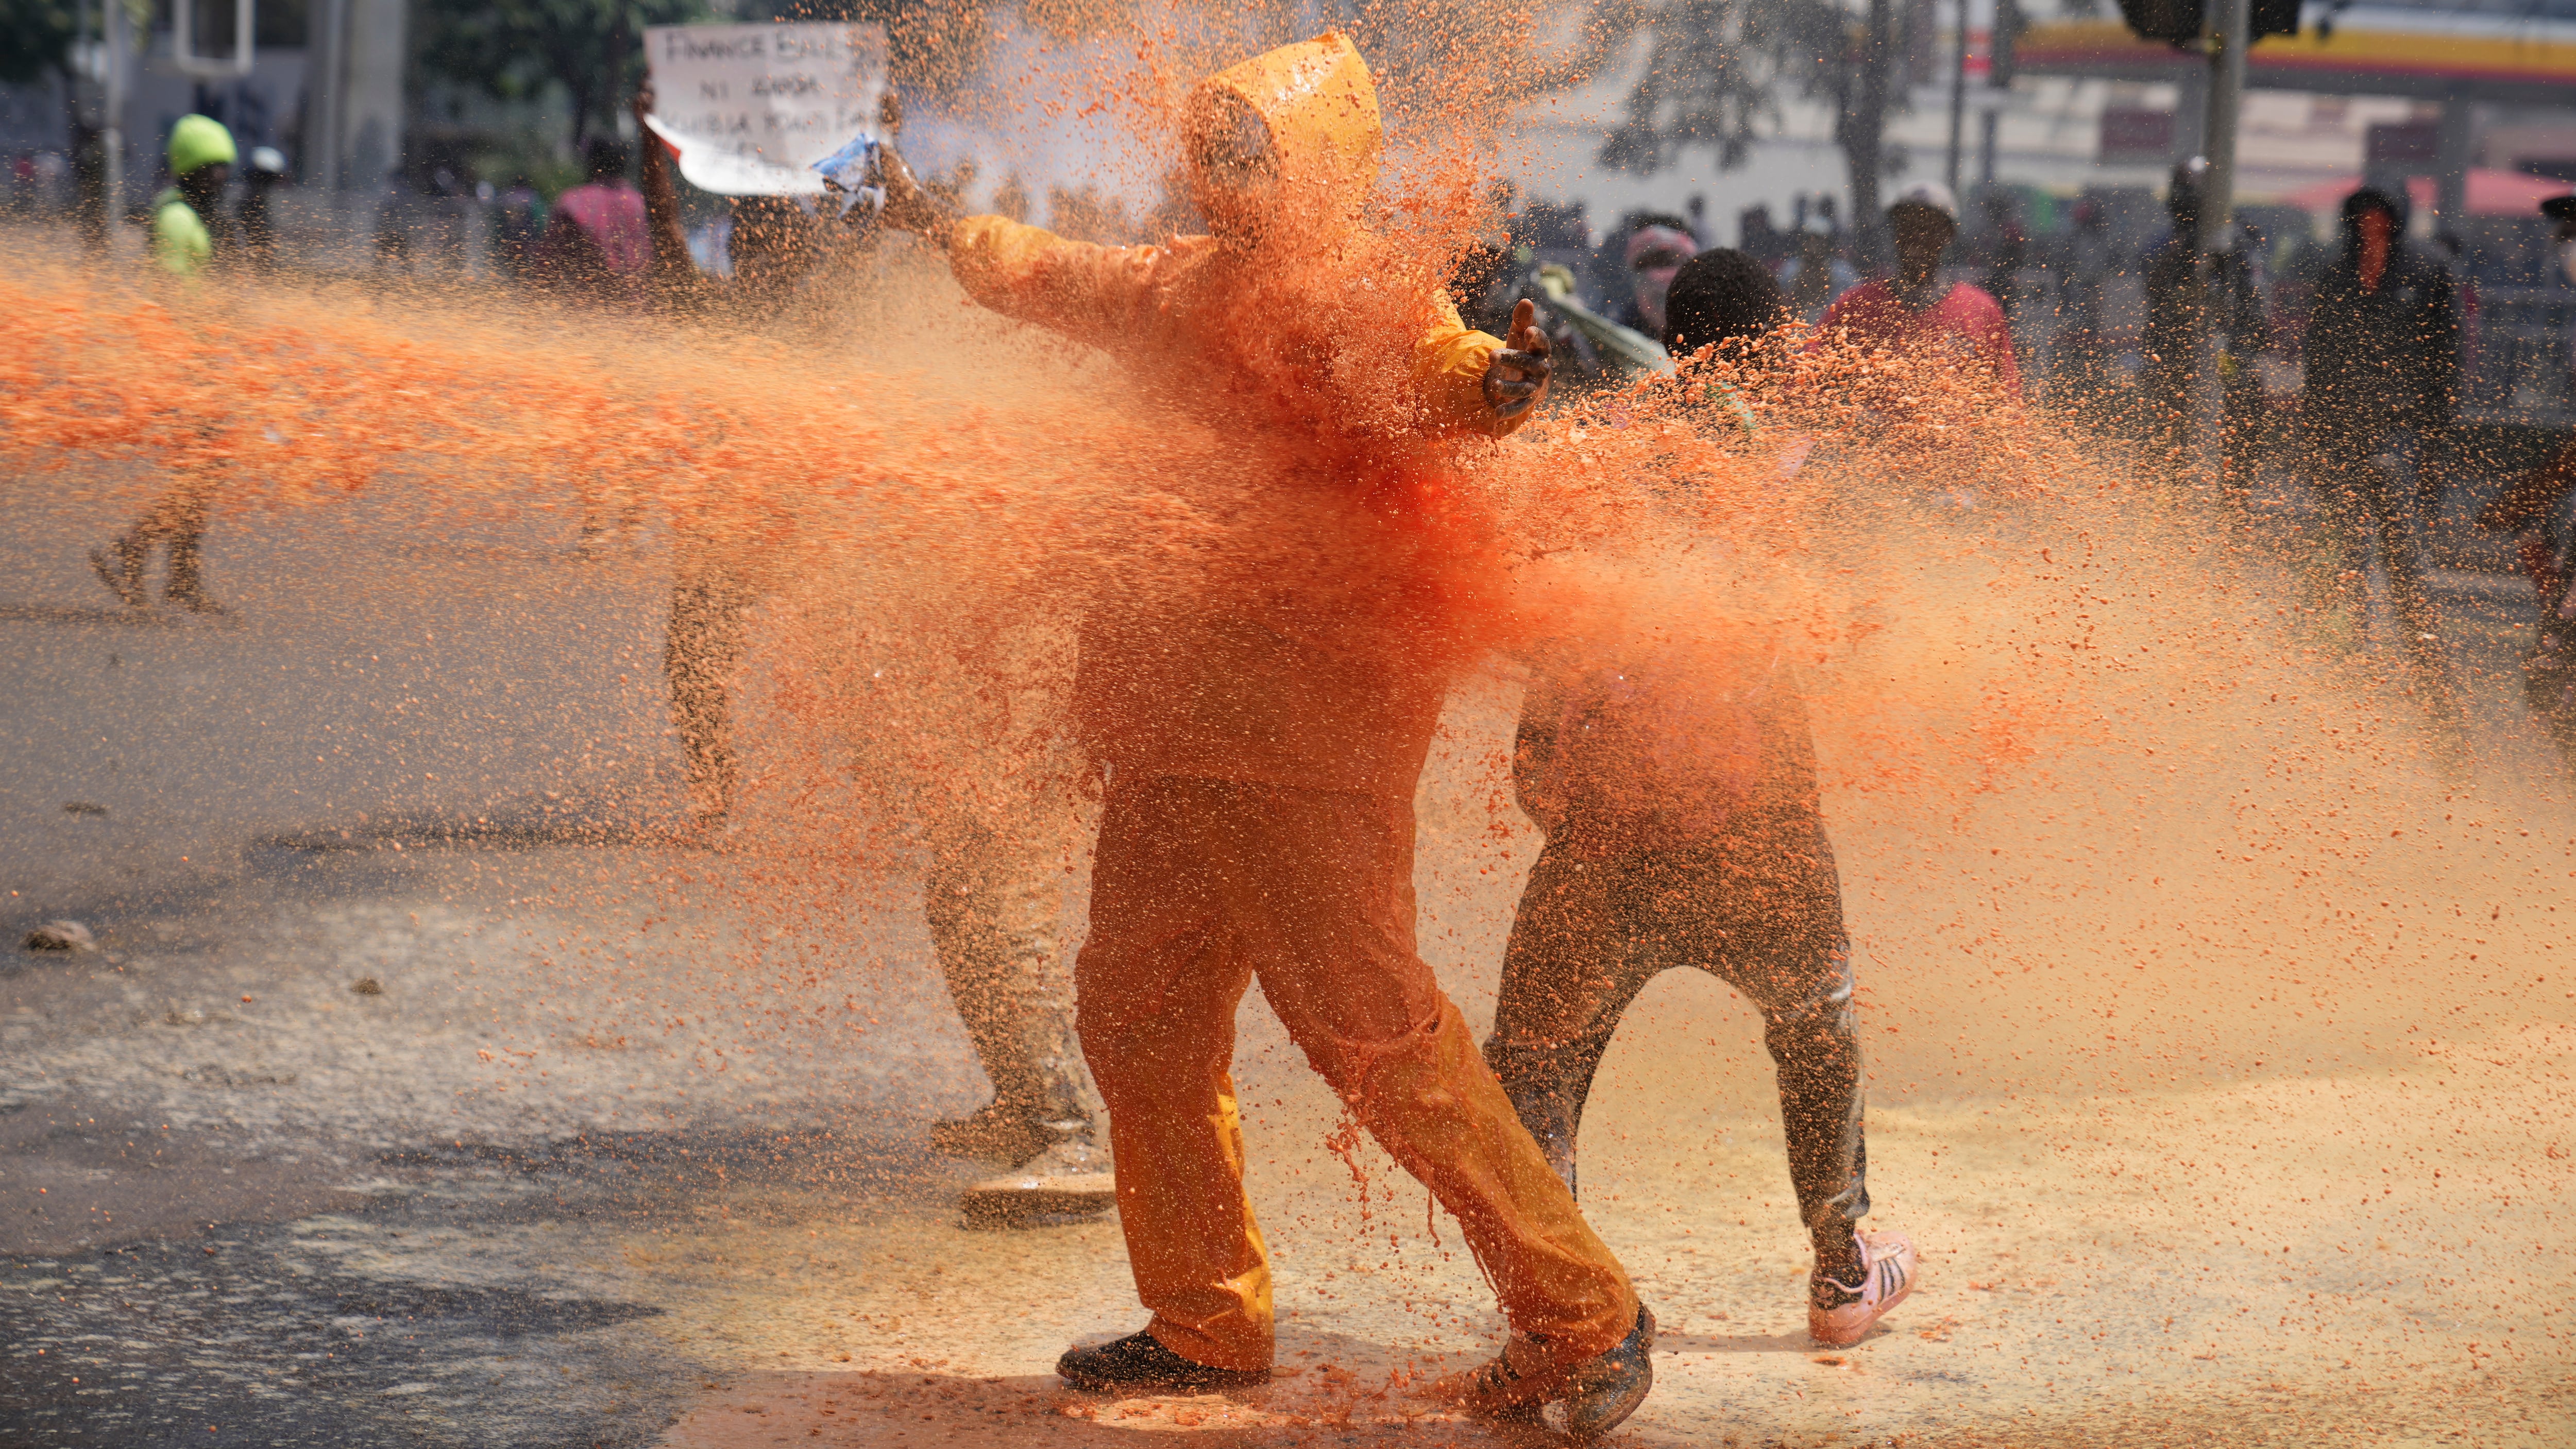 Police sprayed water cannon at the anti-tax protesters in Nairobi (Brian Inganga/AP)